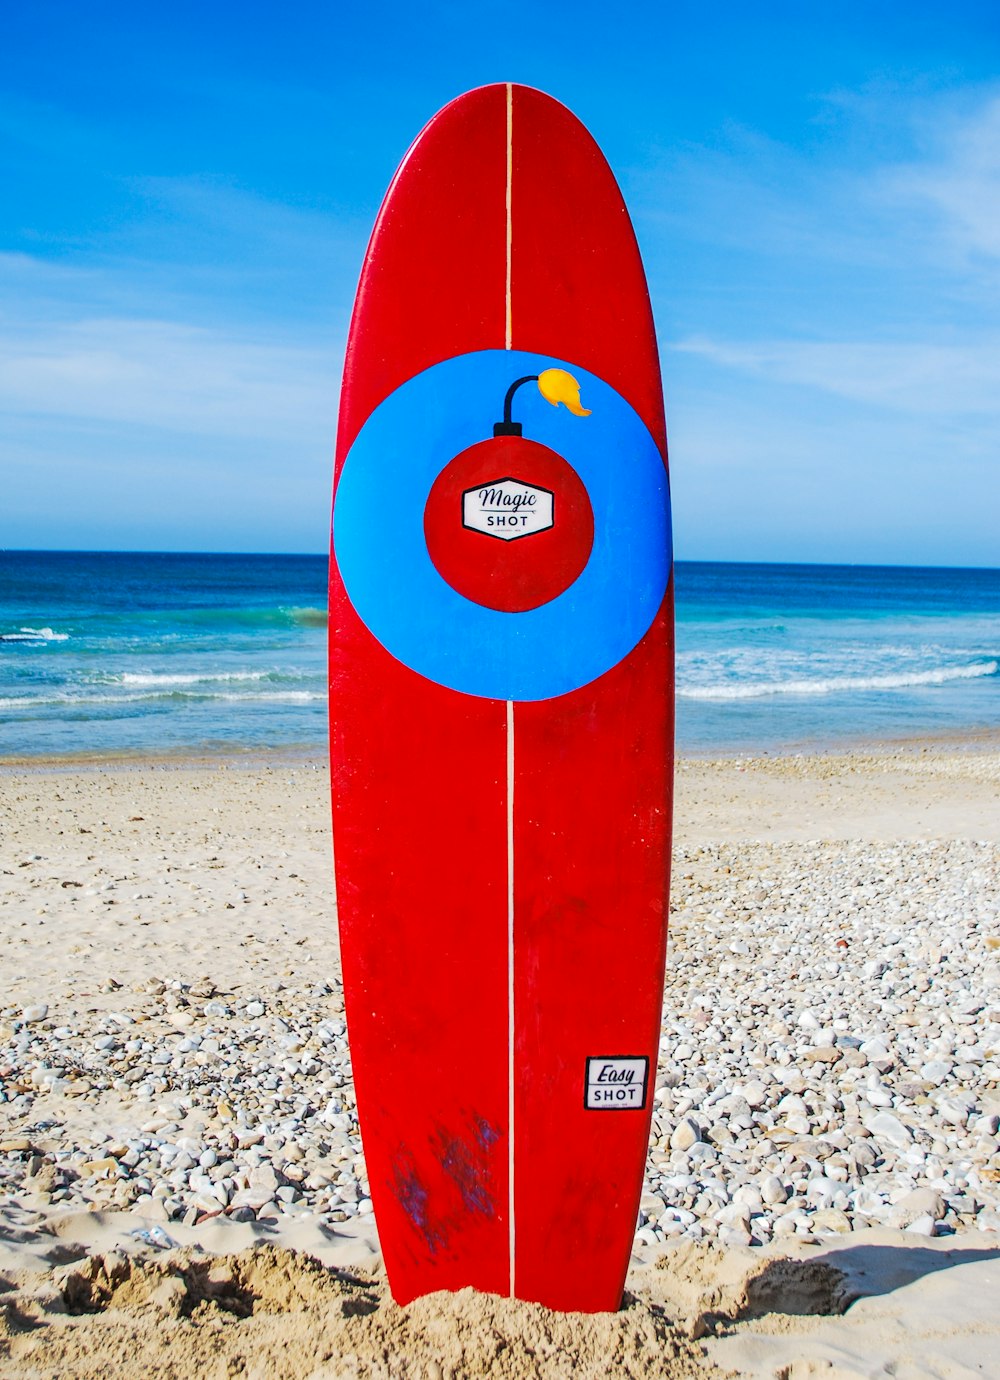 red surfboard on beach shore during daytime